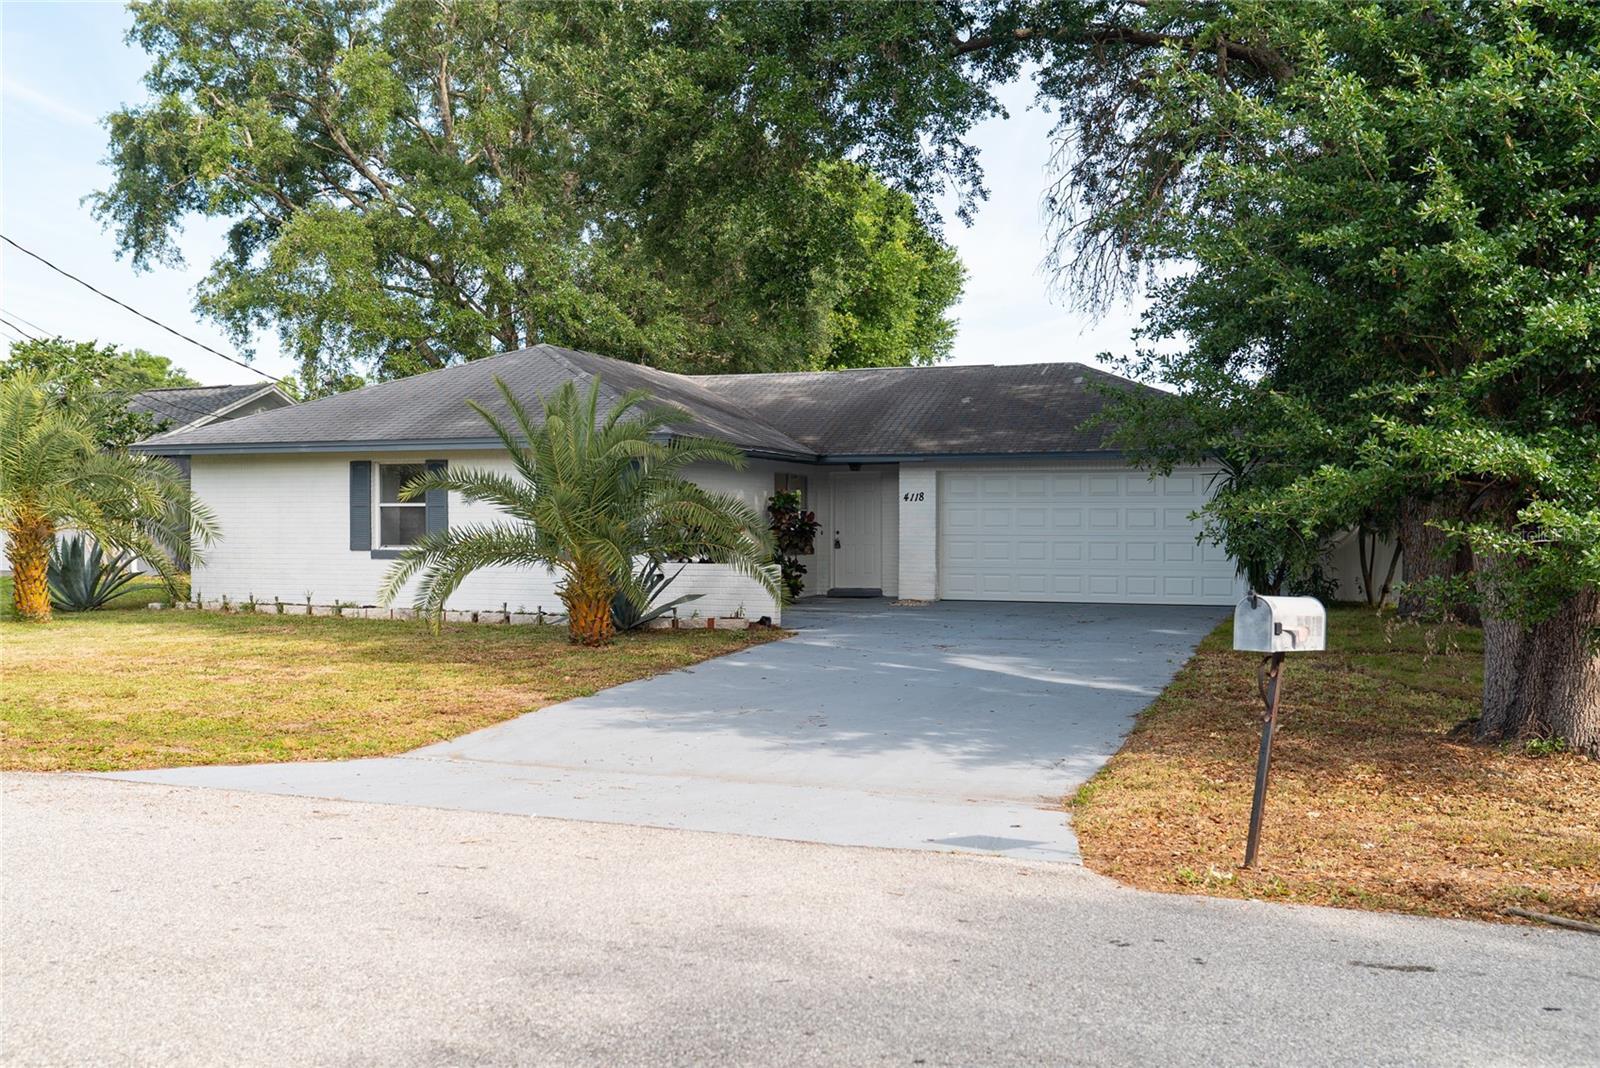 Photo one of 4118 Sunny View Dr Lakeland FL 33813 | MLS O6193207